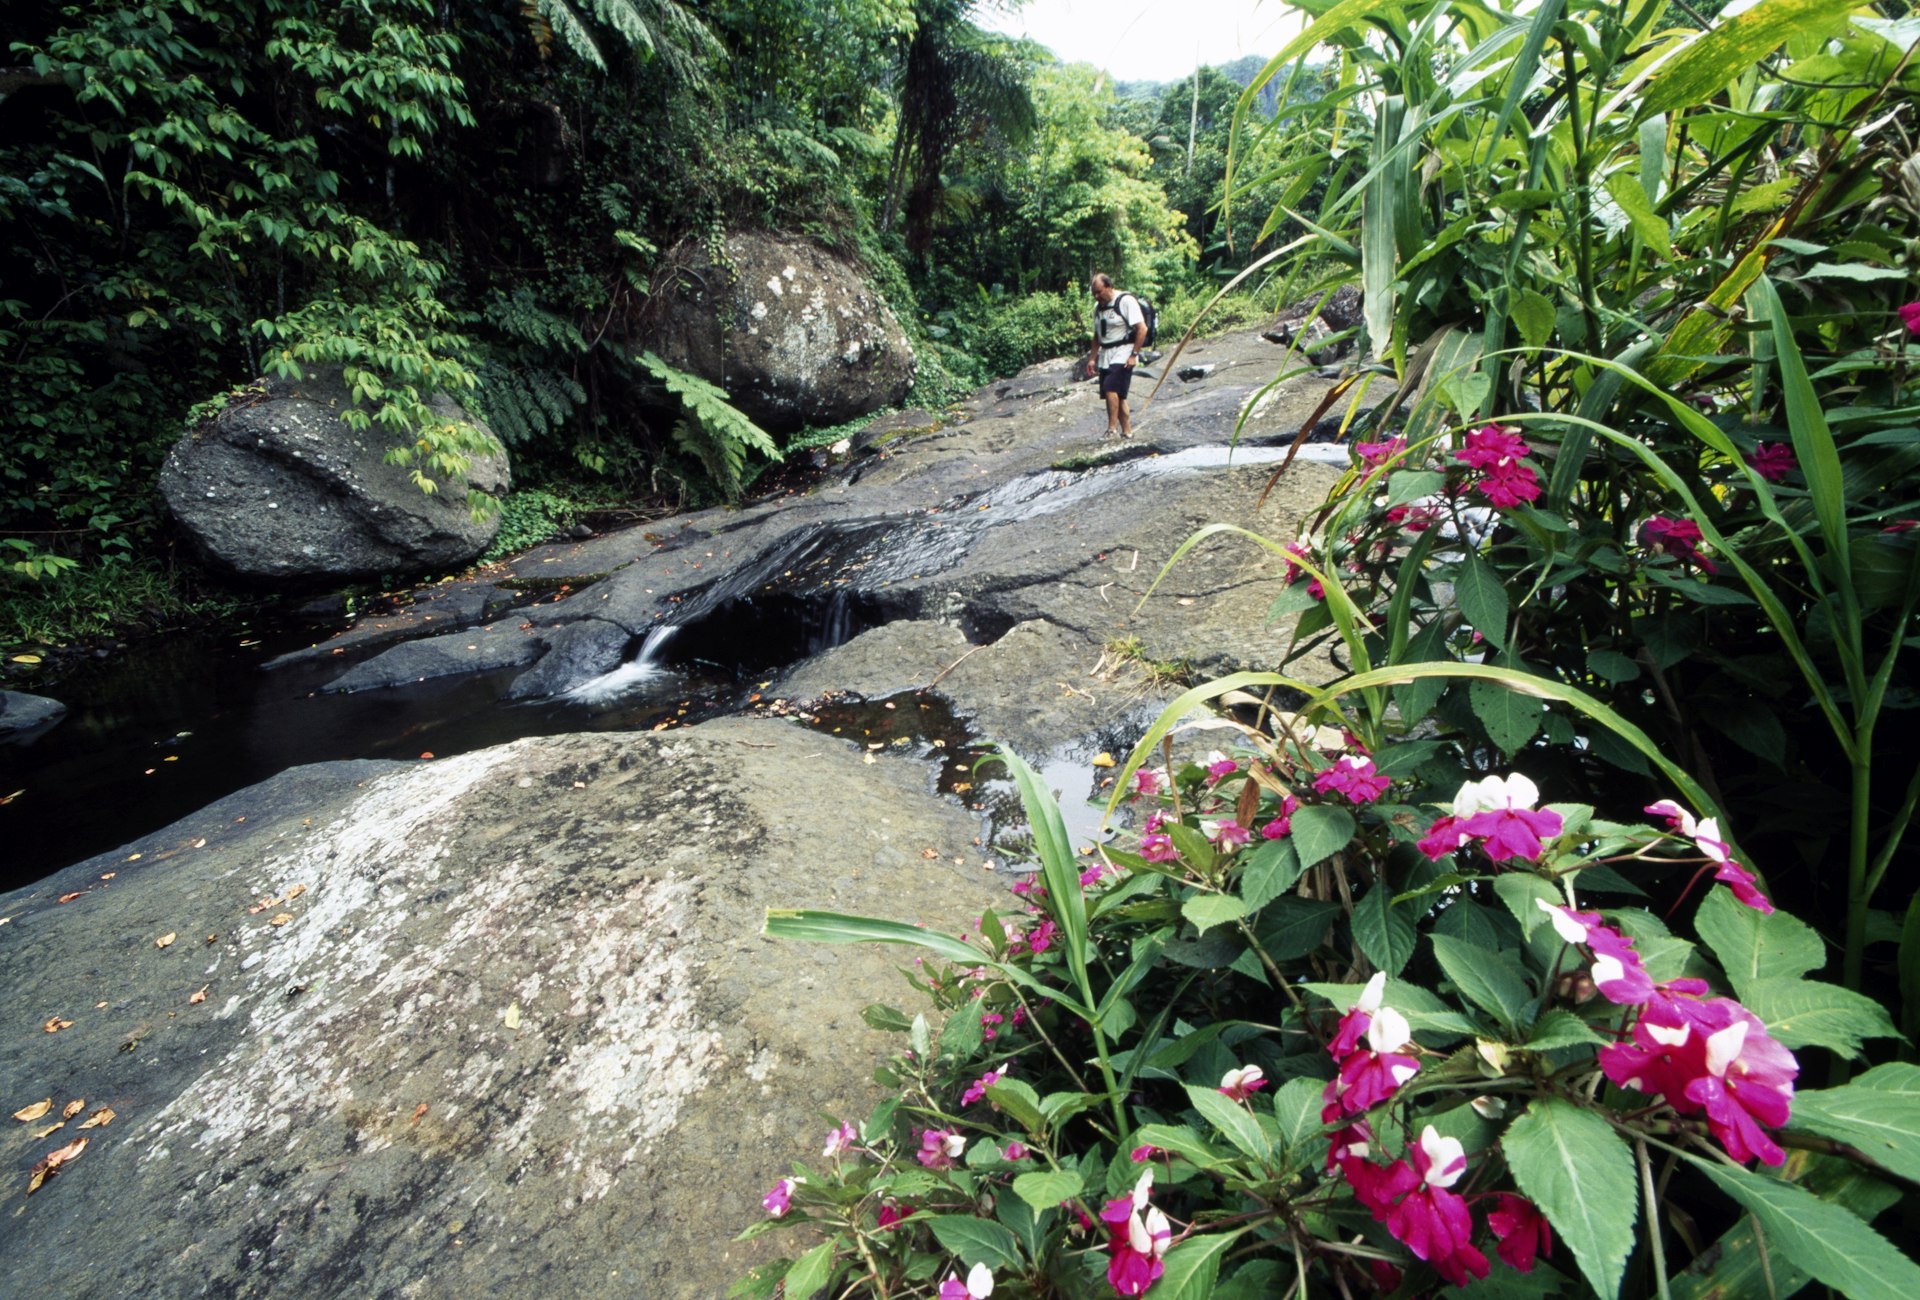 A hiker stops on a rocky stretch of a trail with pink flowers in the foreground at Koroyanitu National Heritage Park, Fji